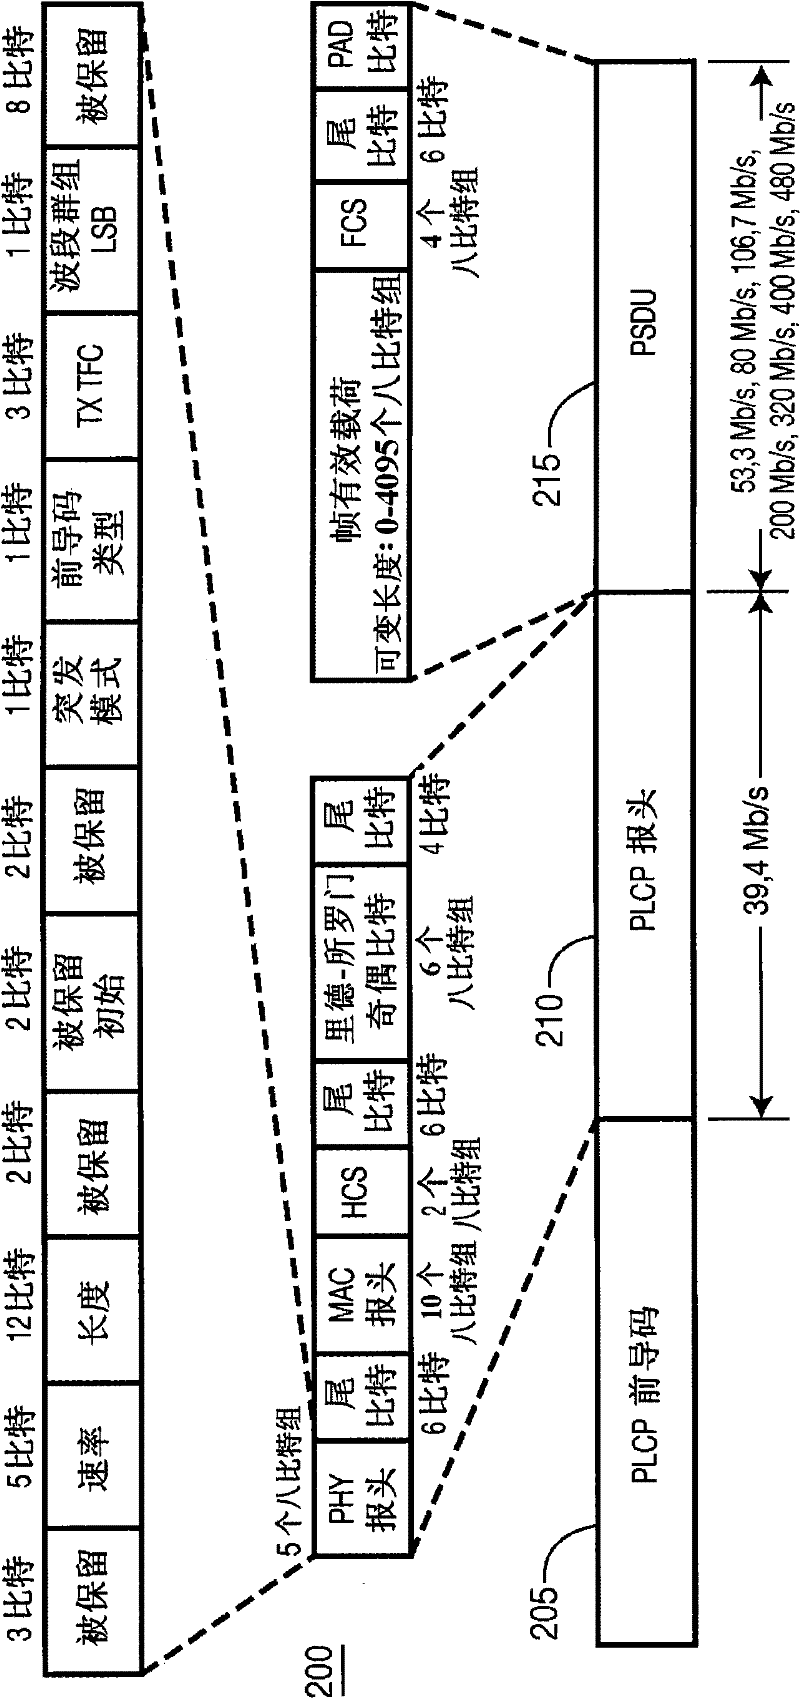 Wireless communication method and apparatus for allocating training signals and information bits